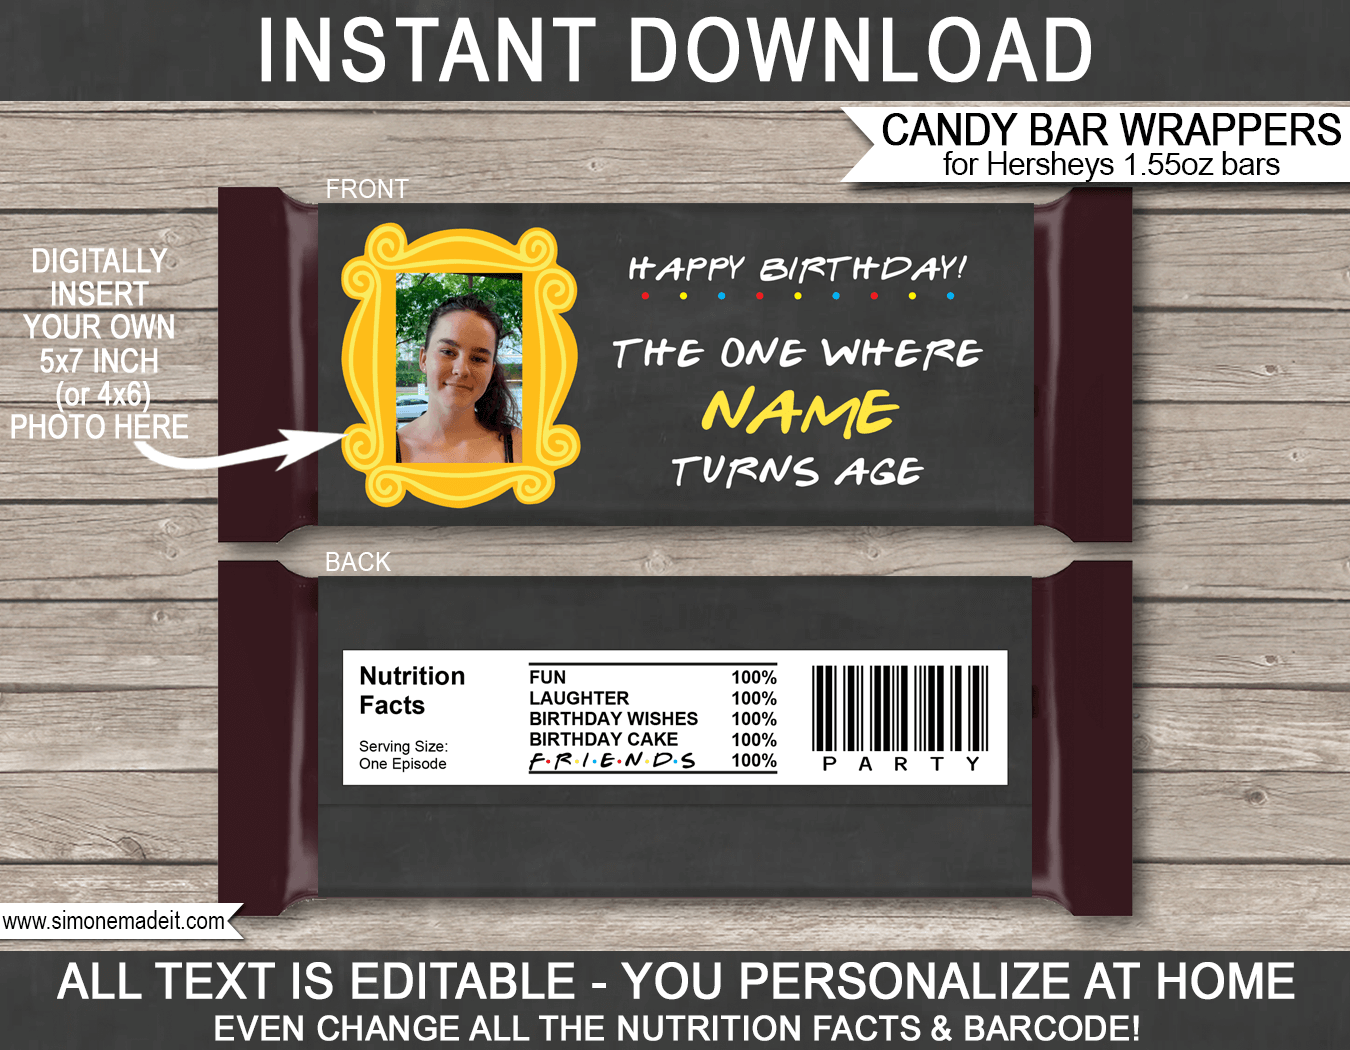 Printable Friends TV Show Hershey Candy Bar Wrappers | The One Where .. has a Birthday Episode | Chocolate Bar Labels | Friends Theme | TV Series | Personalized Candy Bars | Birthday Party Favors | Editable Template | INSTANT DOWNLOAD via simonemadeit.com